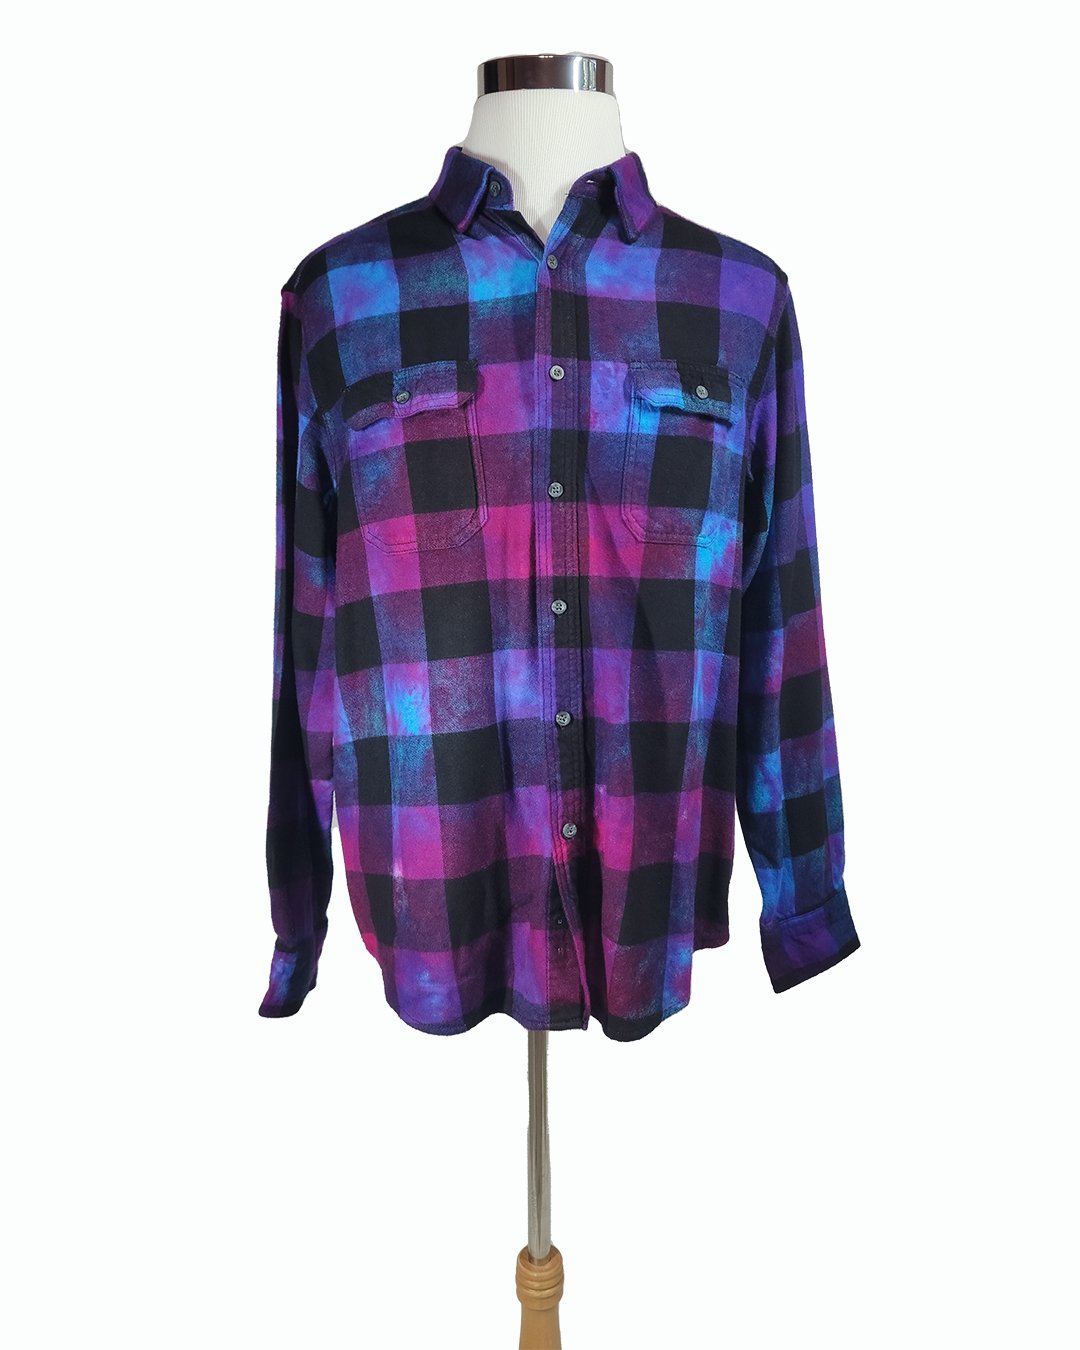 Adult X-large Tie Dyed Flannel Shirt — Fun Endeavors Tie Dye Lab